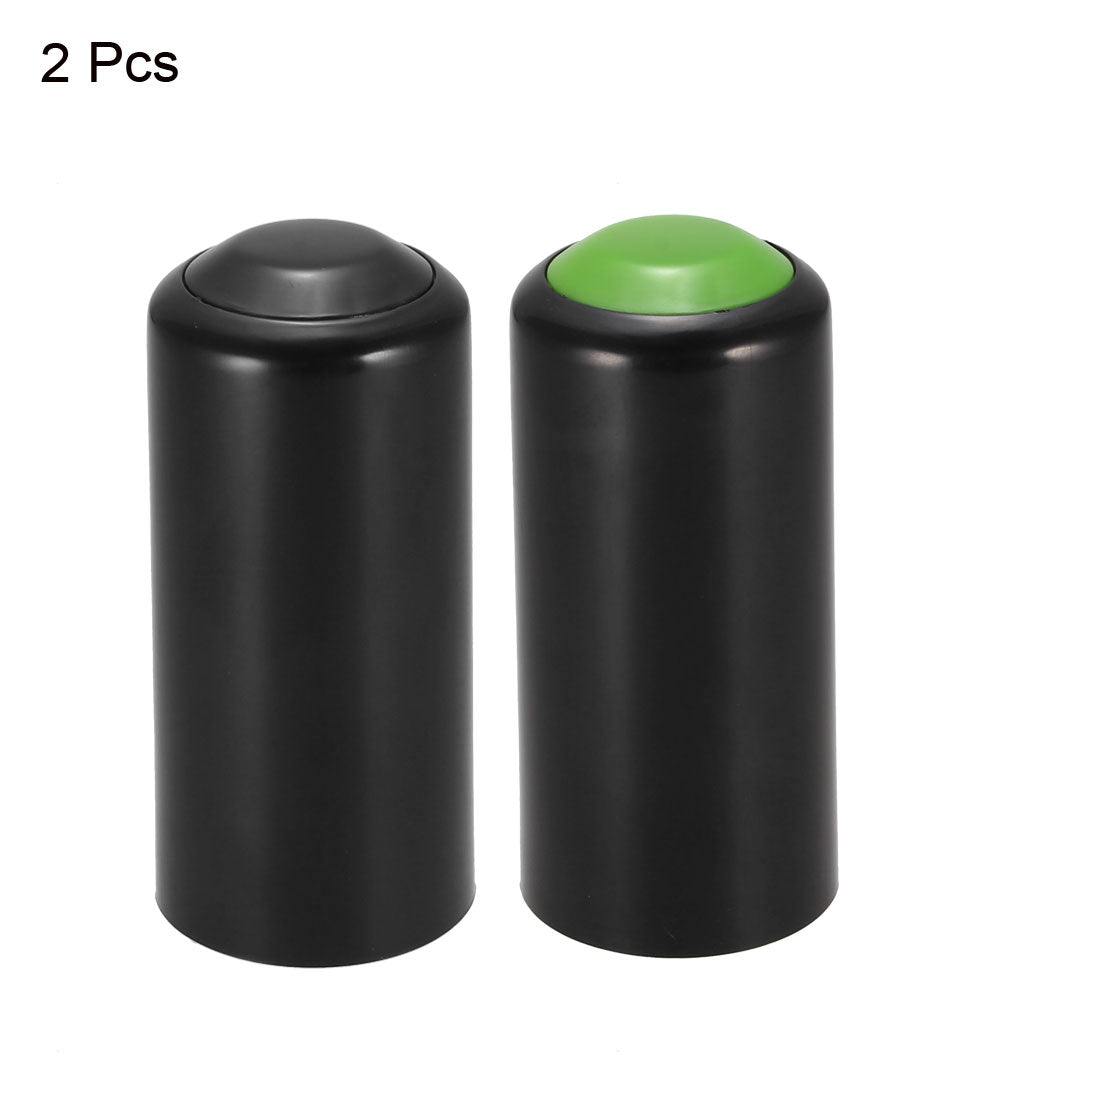 uxcell Uxcell Battery Cover Mic Battery Screw on Cap Cup Cover for PGX24 SLX24 PG58 SM58 BETA58 Wireless Black Green 2Pcs